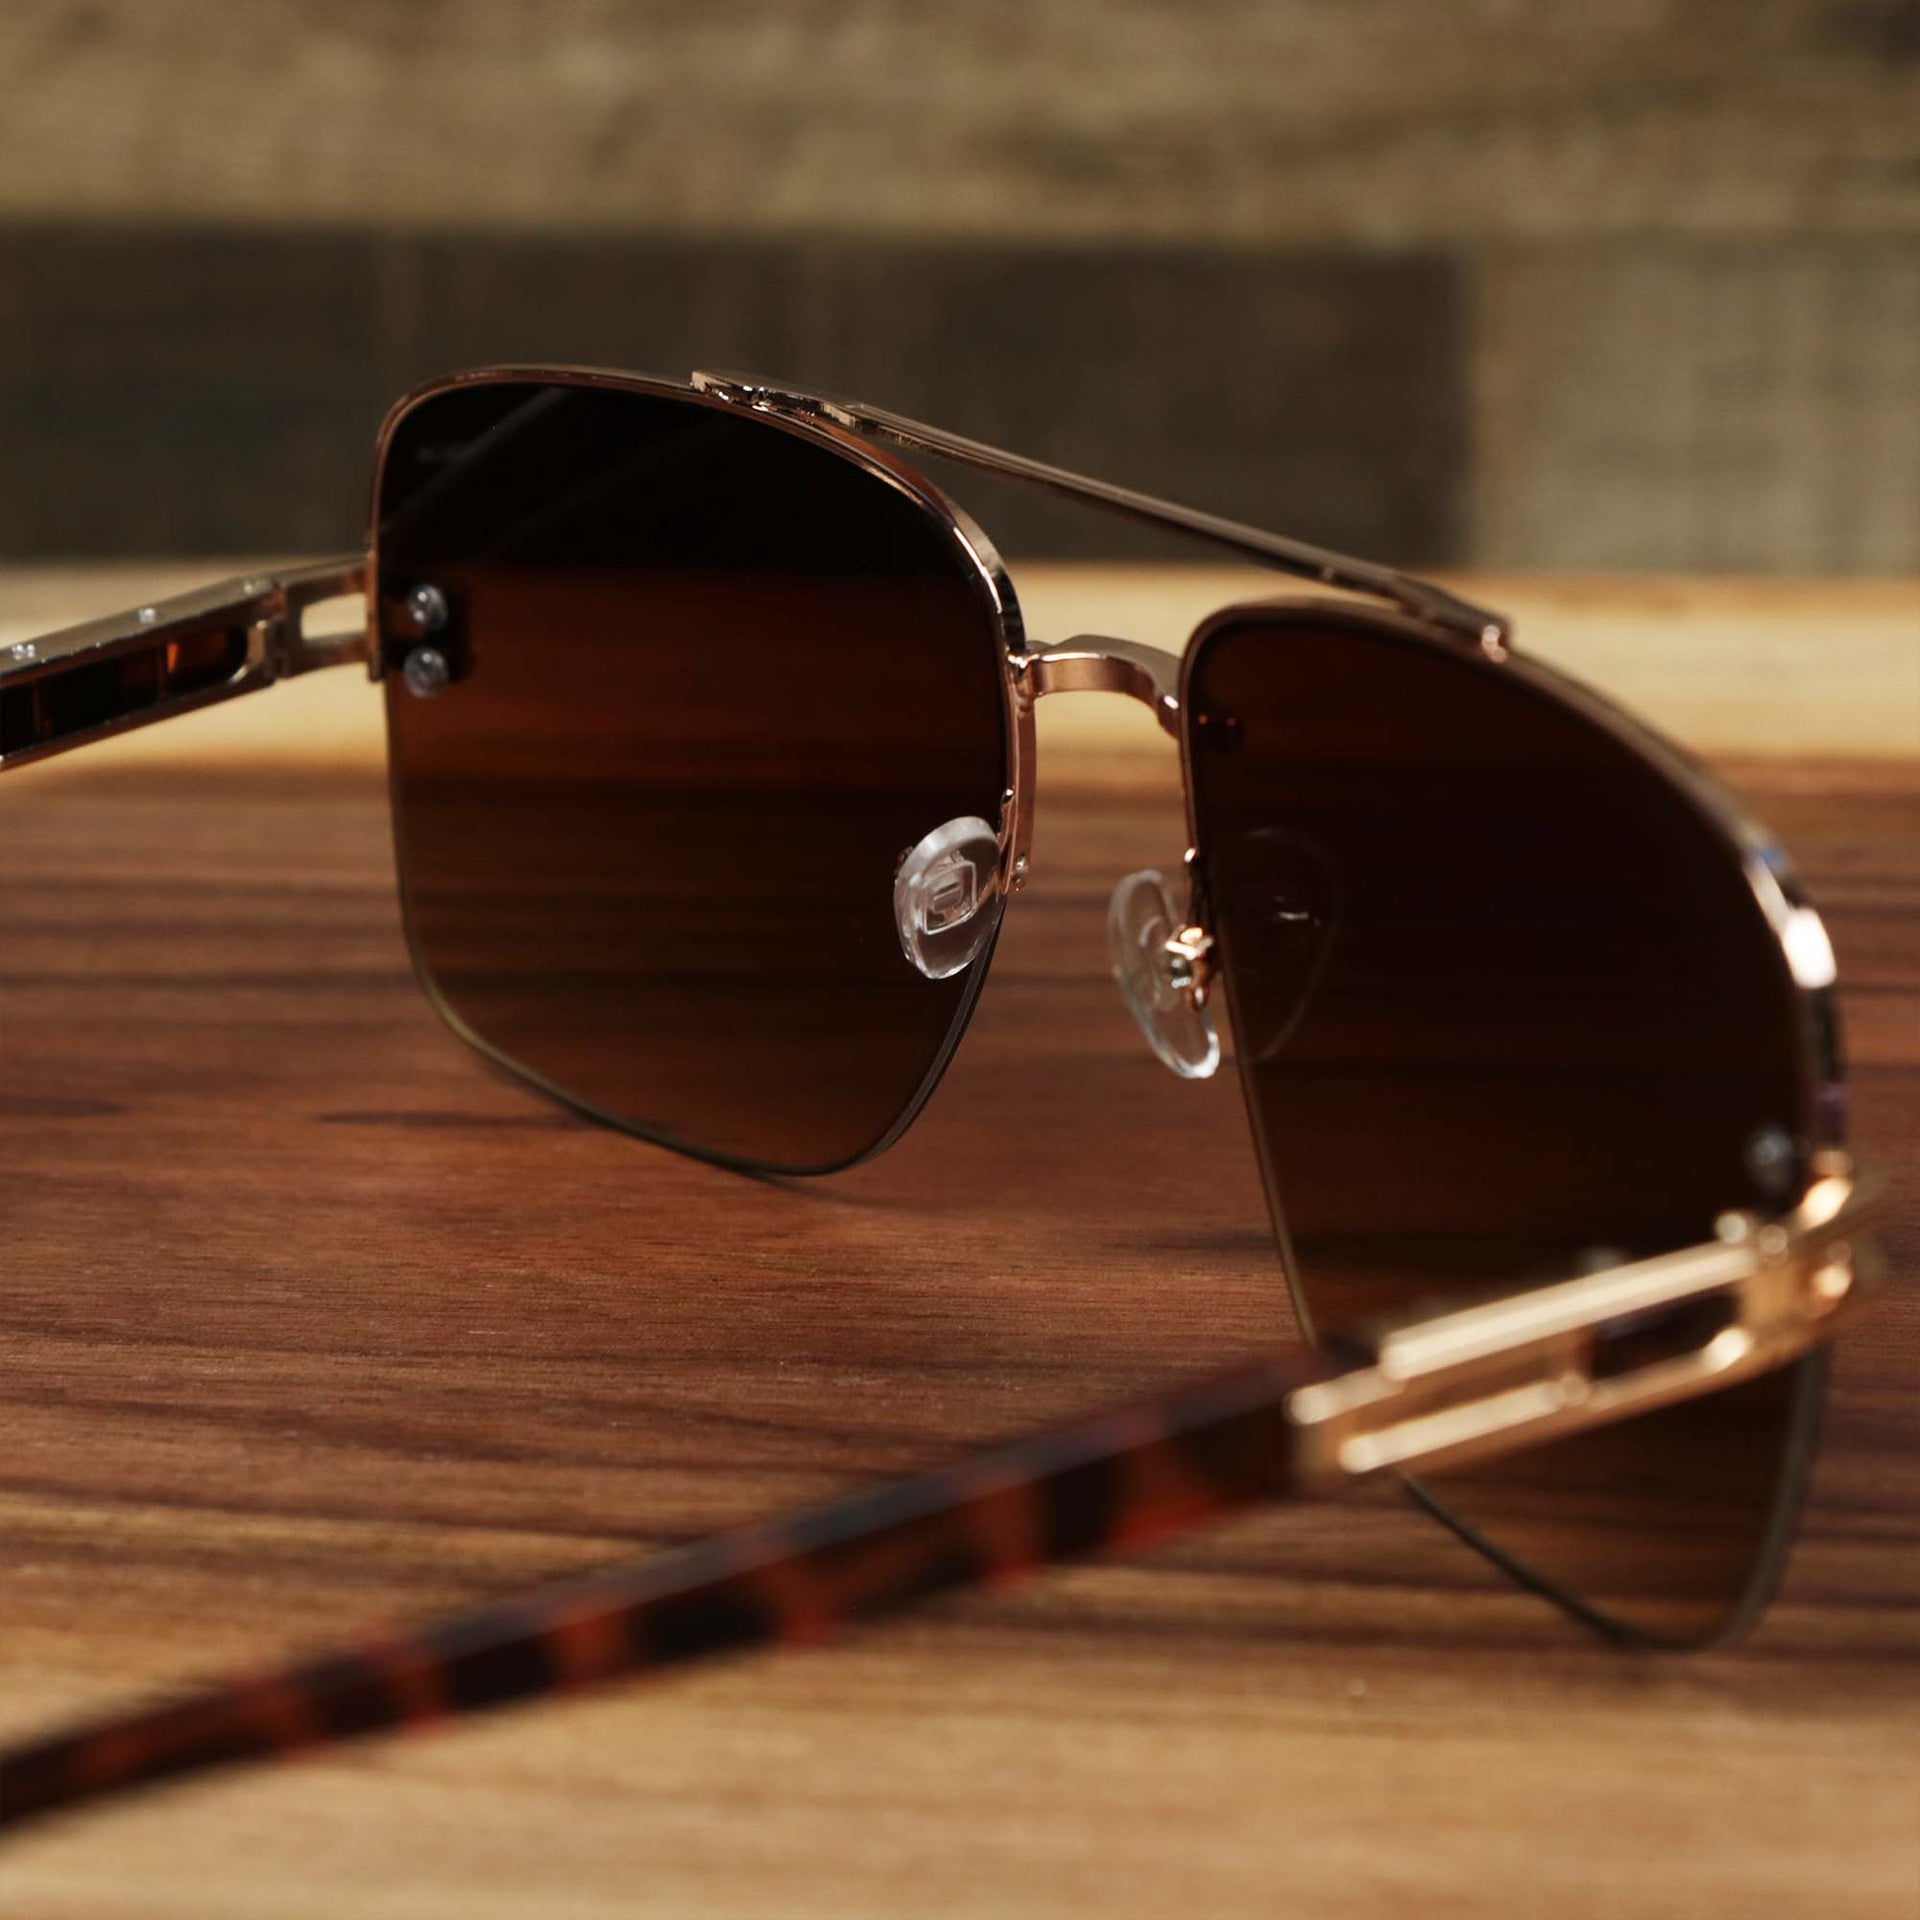 The inside of the Round Rectangle Frame Brown Lens Sunglasses with Rose Gold Tortoise Frame